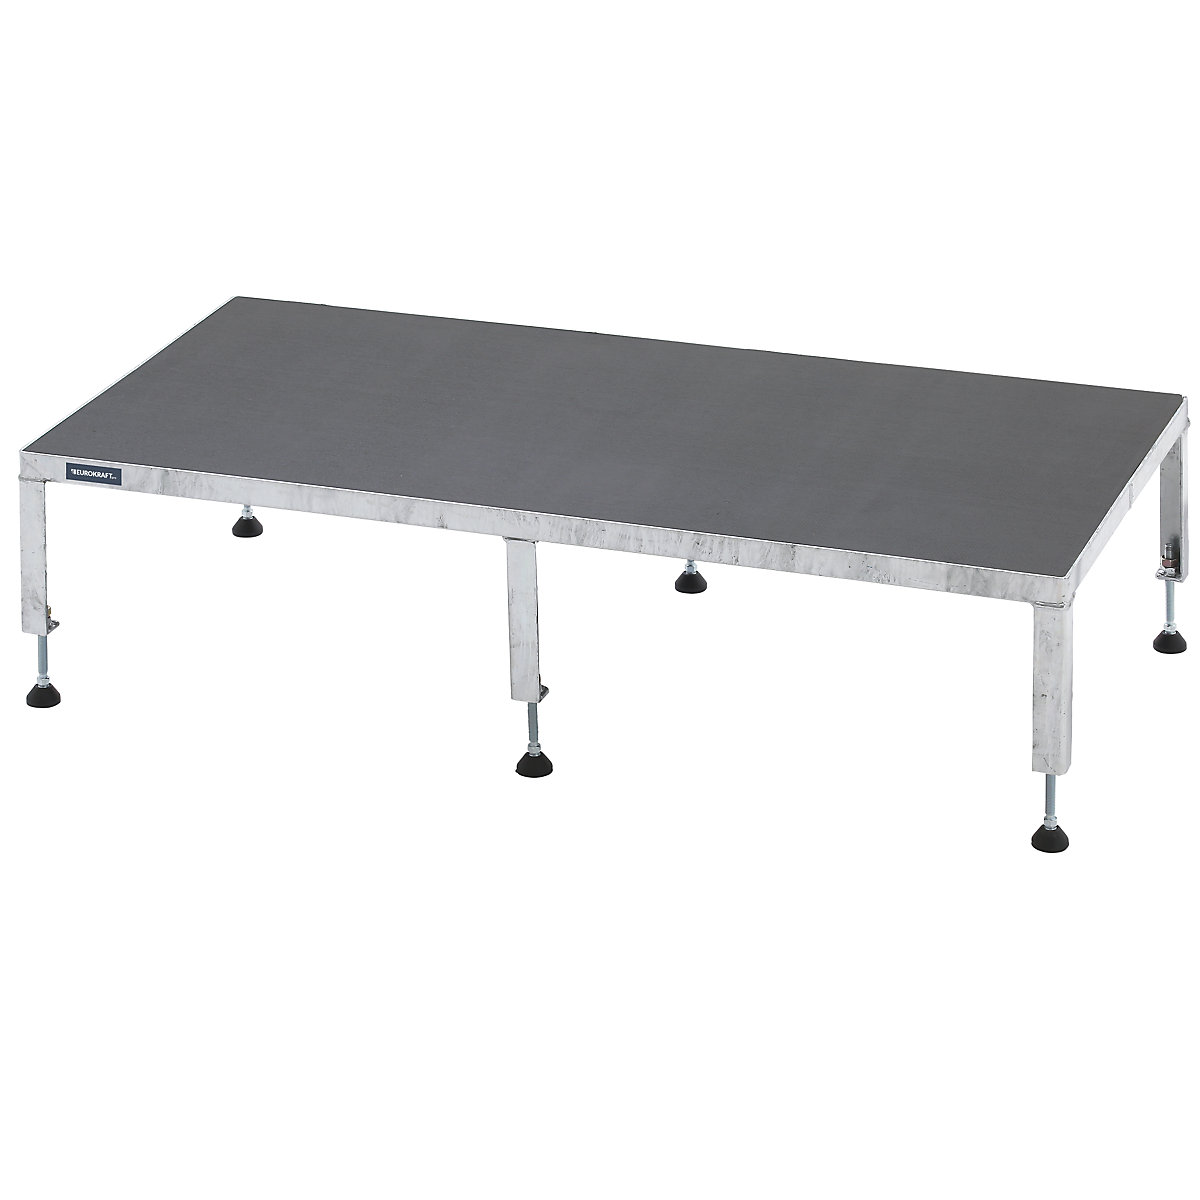 Working platform, height adjustable from 255 – 320 mm – eurokraft pro, with phenolic plywood panel, platform LxW 1210 x 610 mm, hot dip galvanised-6